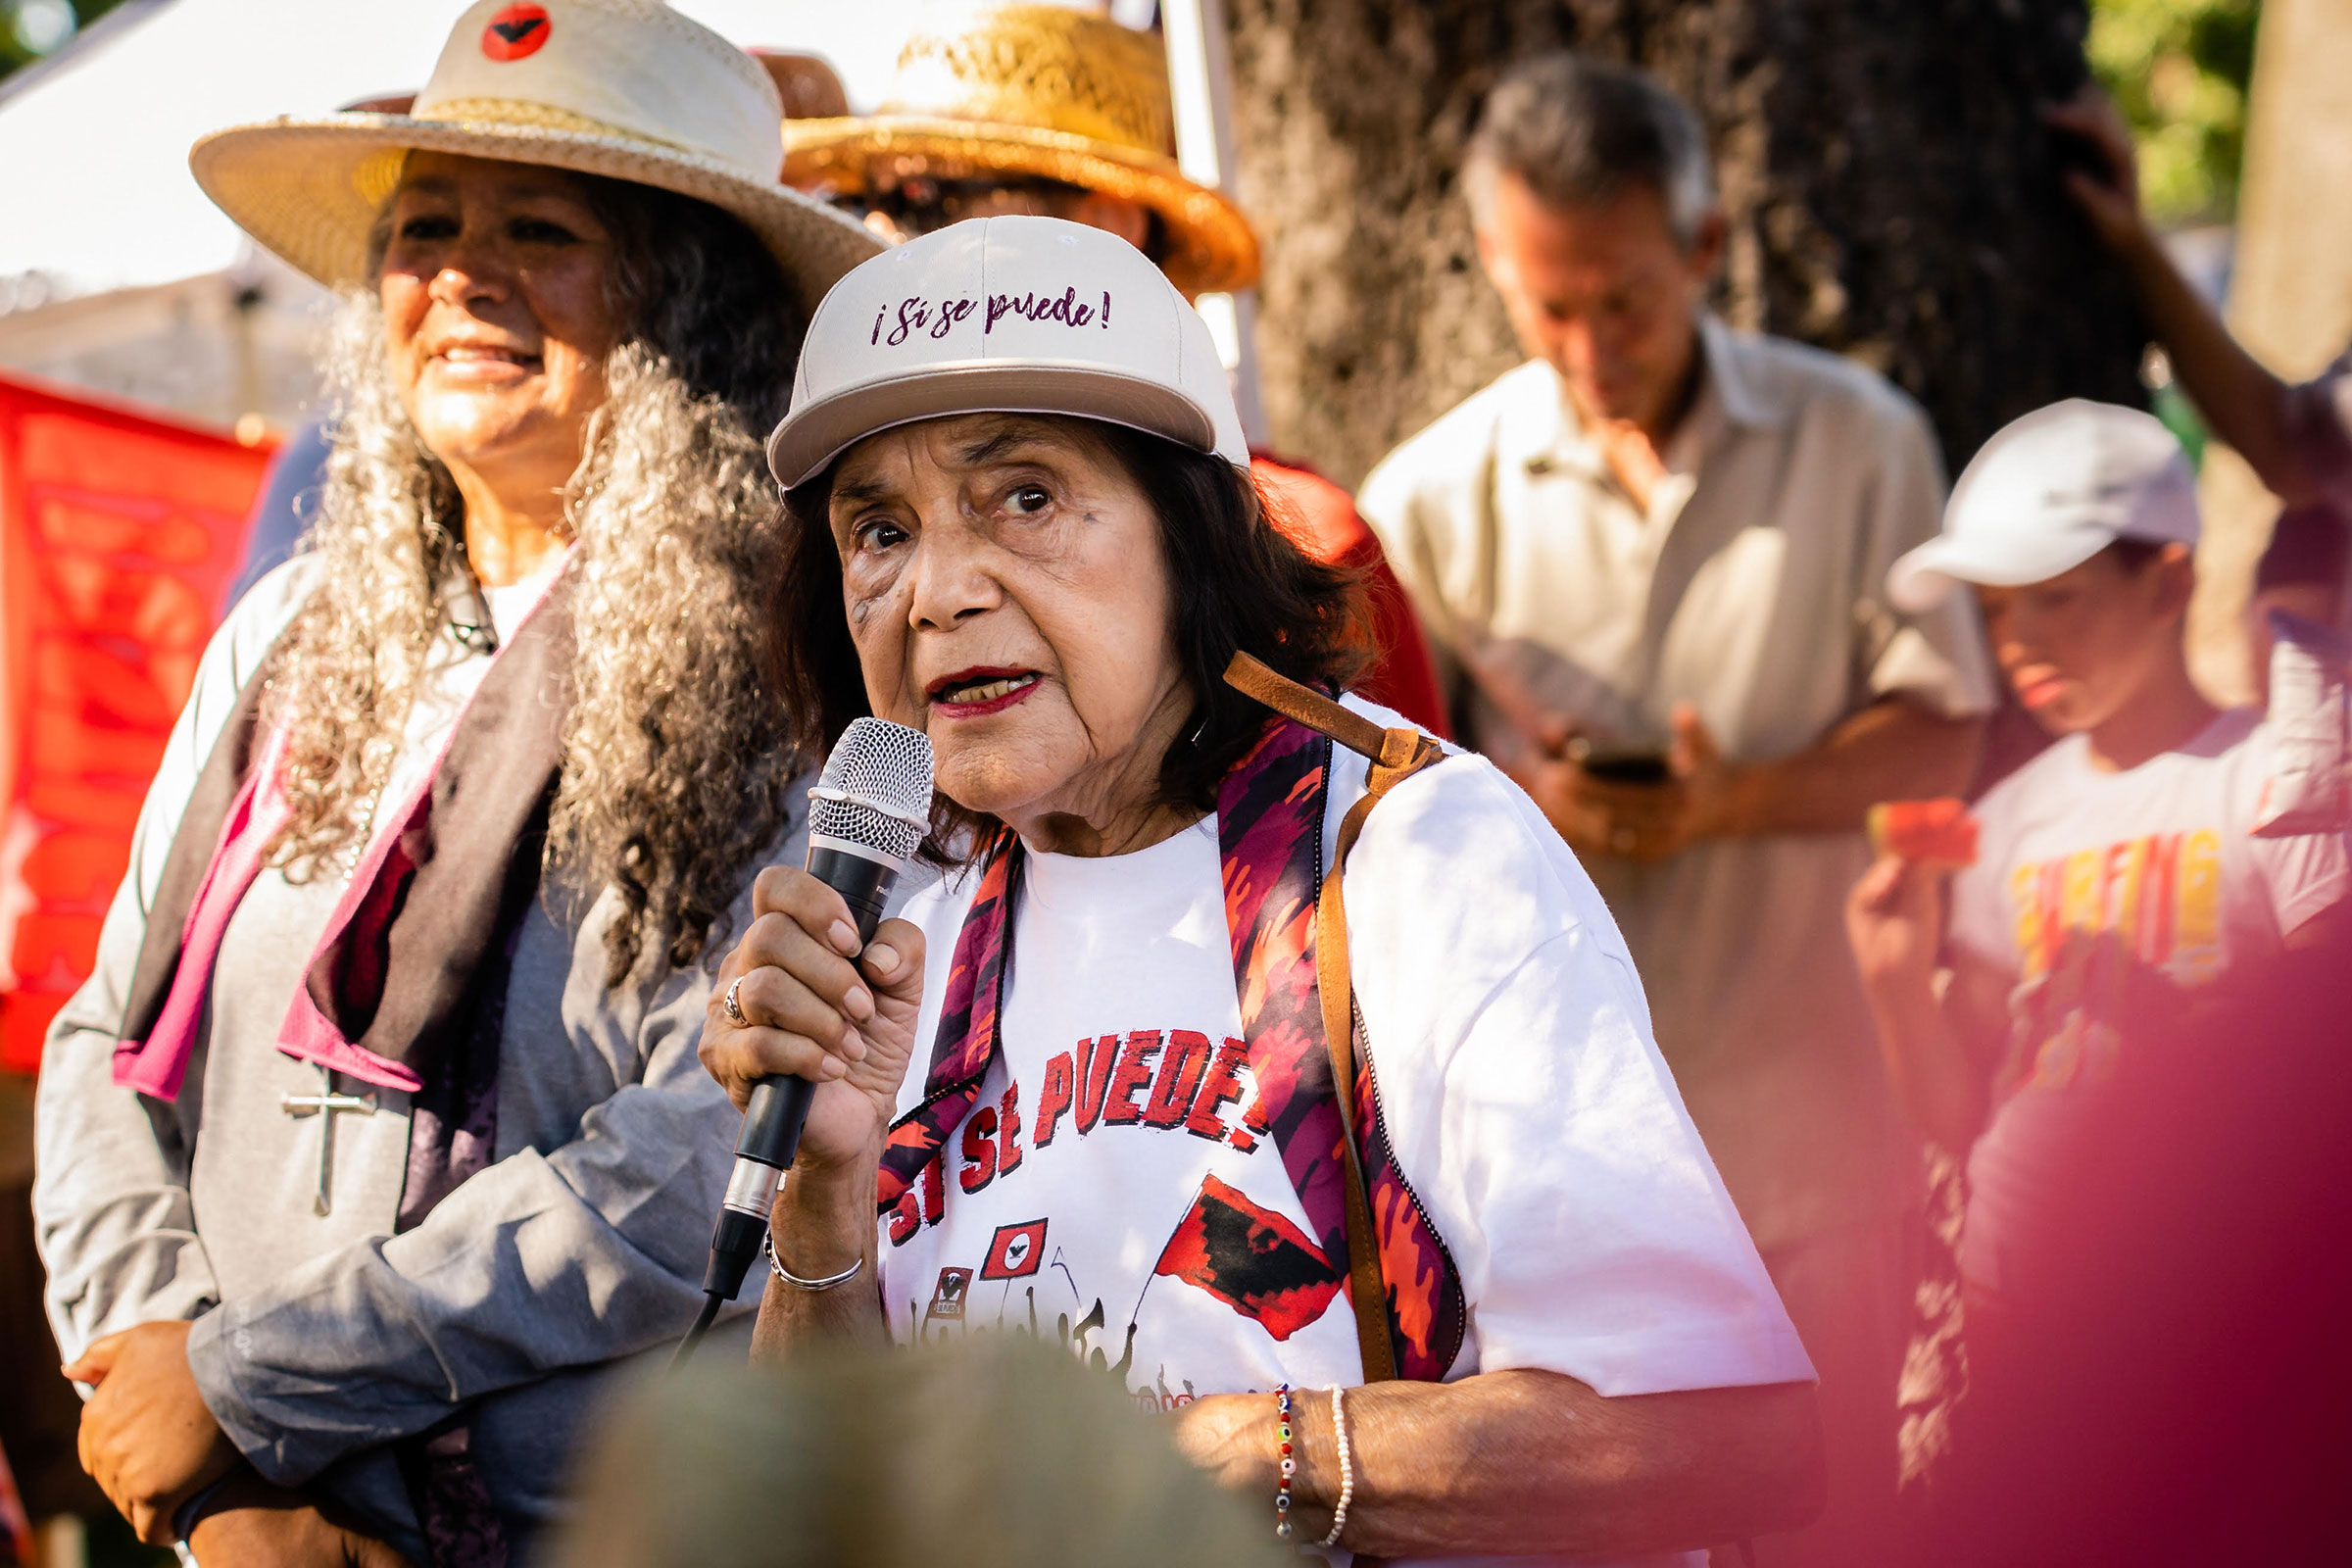 Dolores Huerta speaks to volunteers and supporters at the United Farm Workers march at Constitution Park in Stockton, Calif. on Aug. 20th. (Photo Courtesy of Snap Jackson)